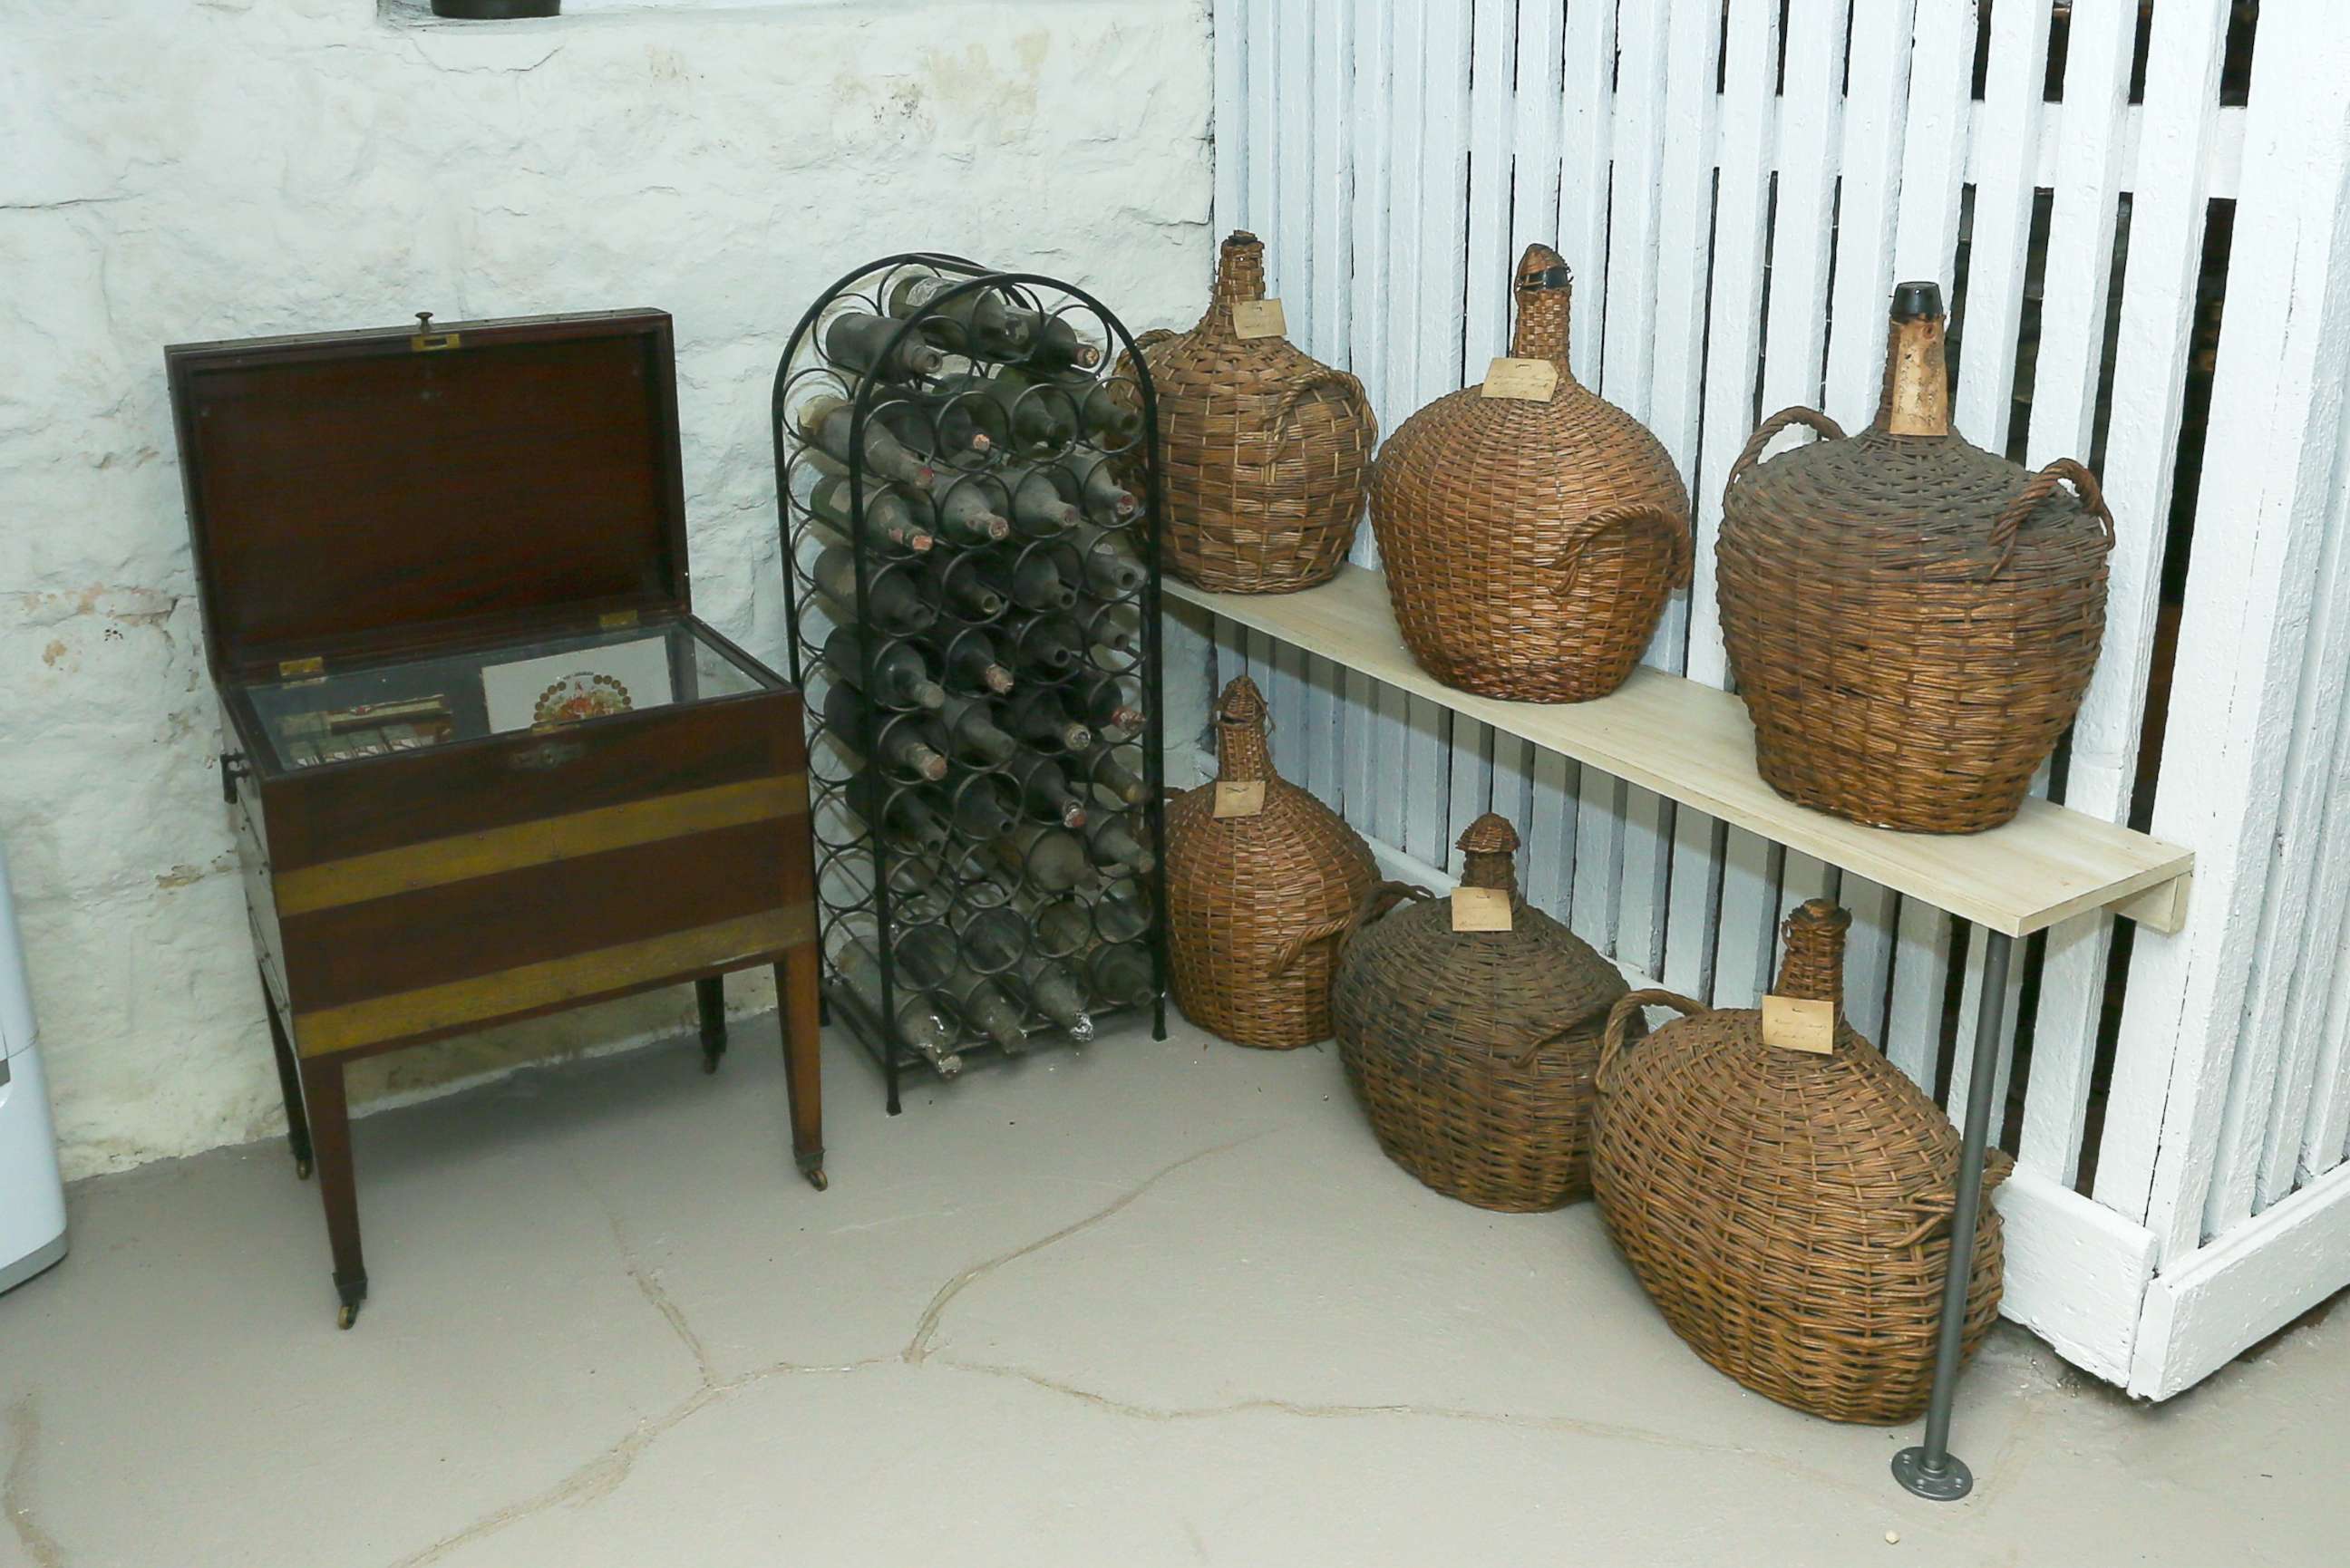 PHOTO: Demijohn casks on display at the Liberty Hall Museum in New Jersey.